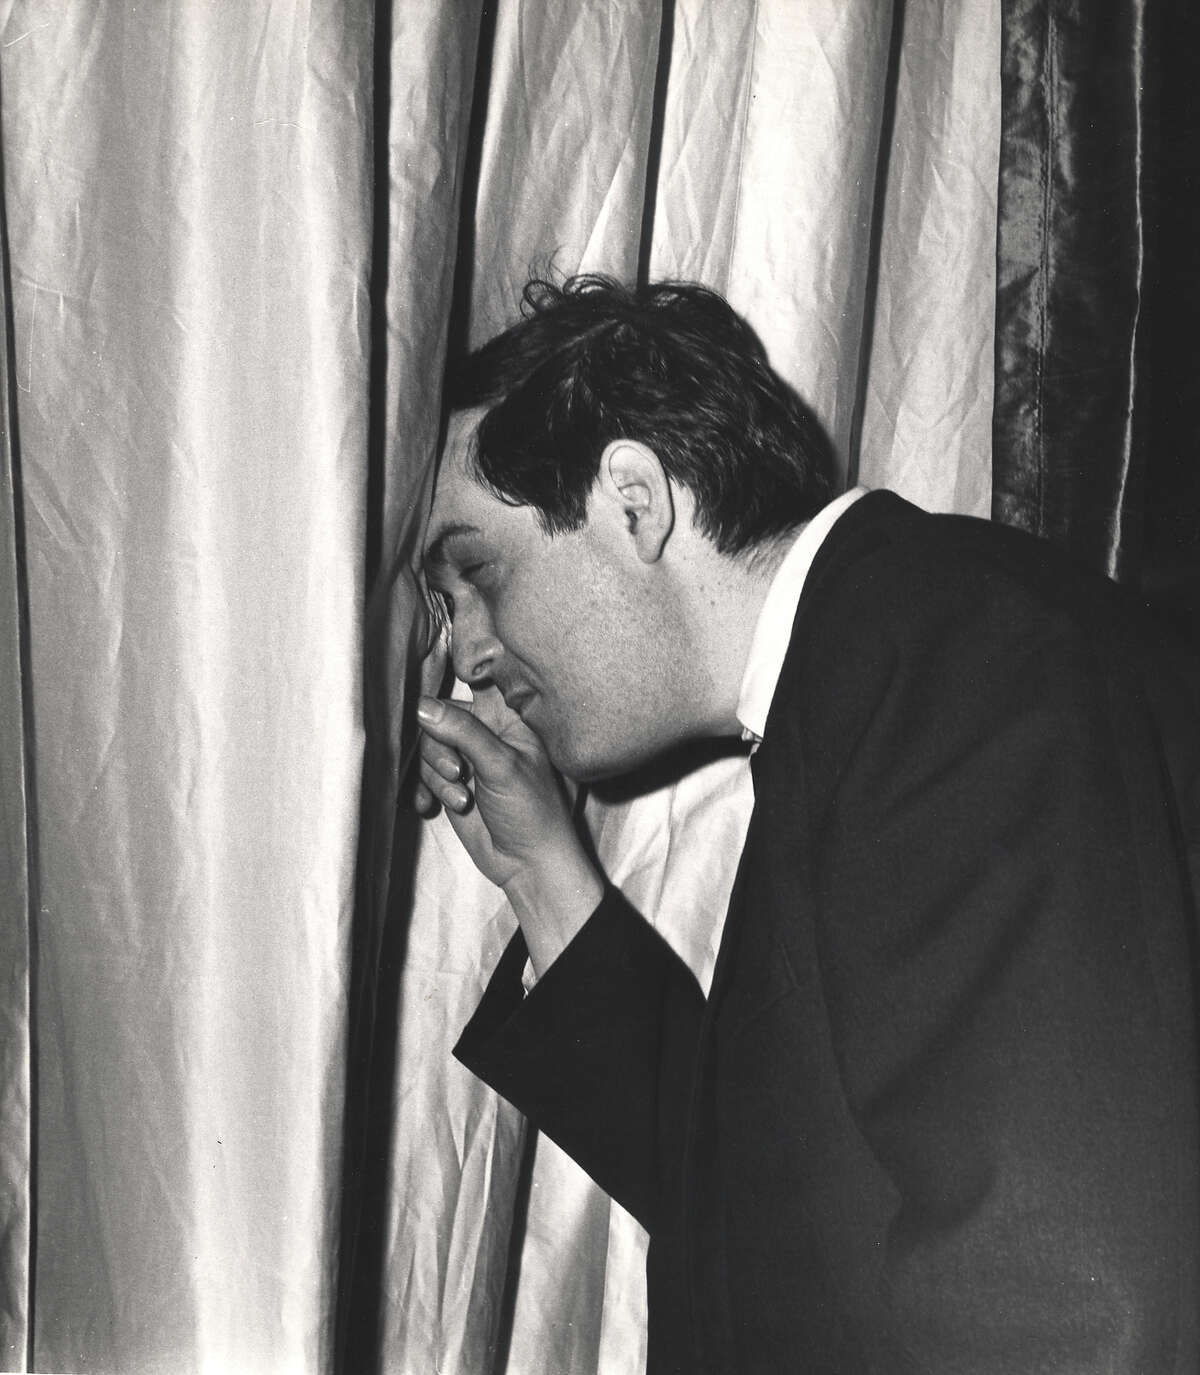 American film director Stanley Kubrick peeks through a curtain on the set of his film 'Dr. Strangelove, Or How I Learned to Stop Worrying and Love the Bomb' (1964) England, early 1963.